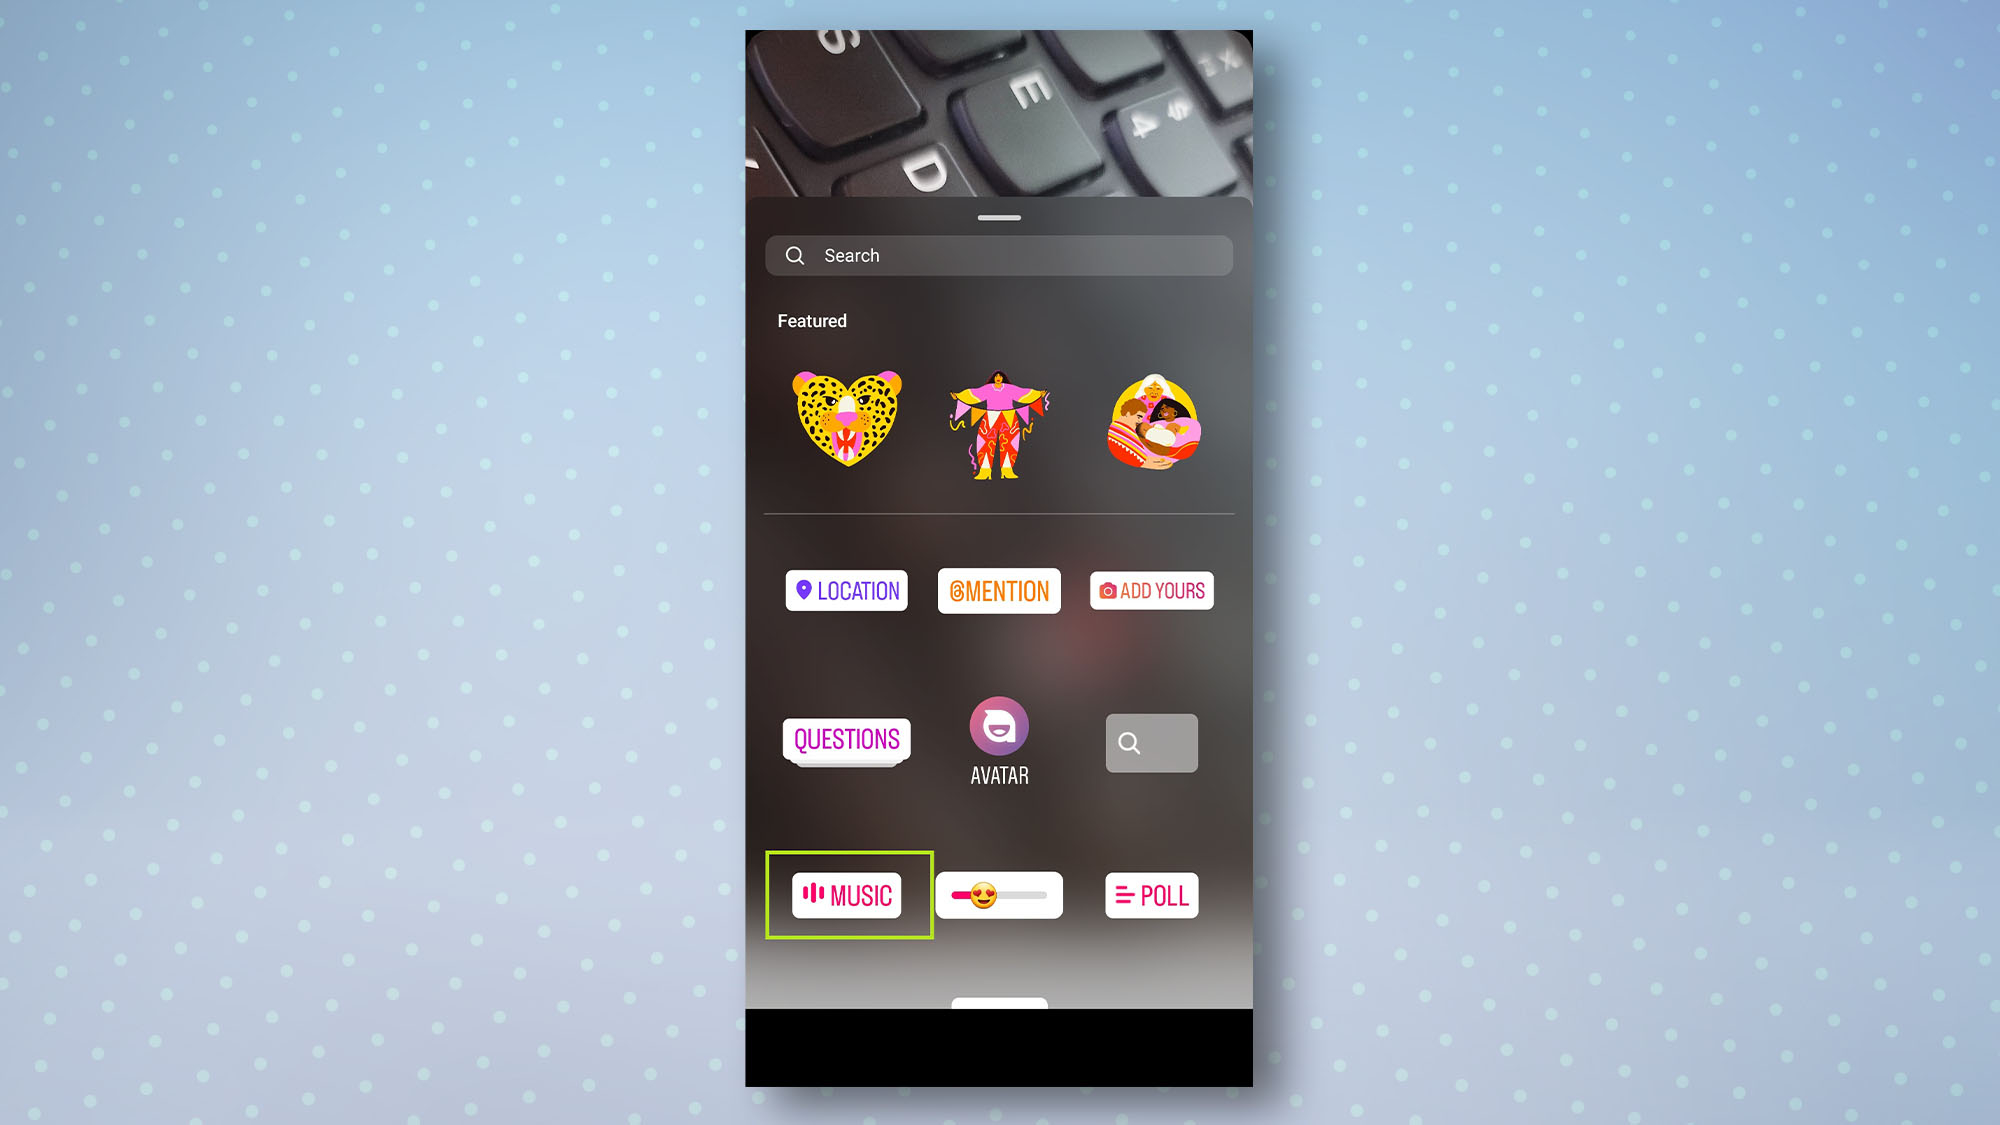 Instagram Android app with Music sticker highlighted